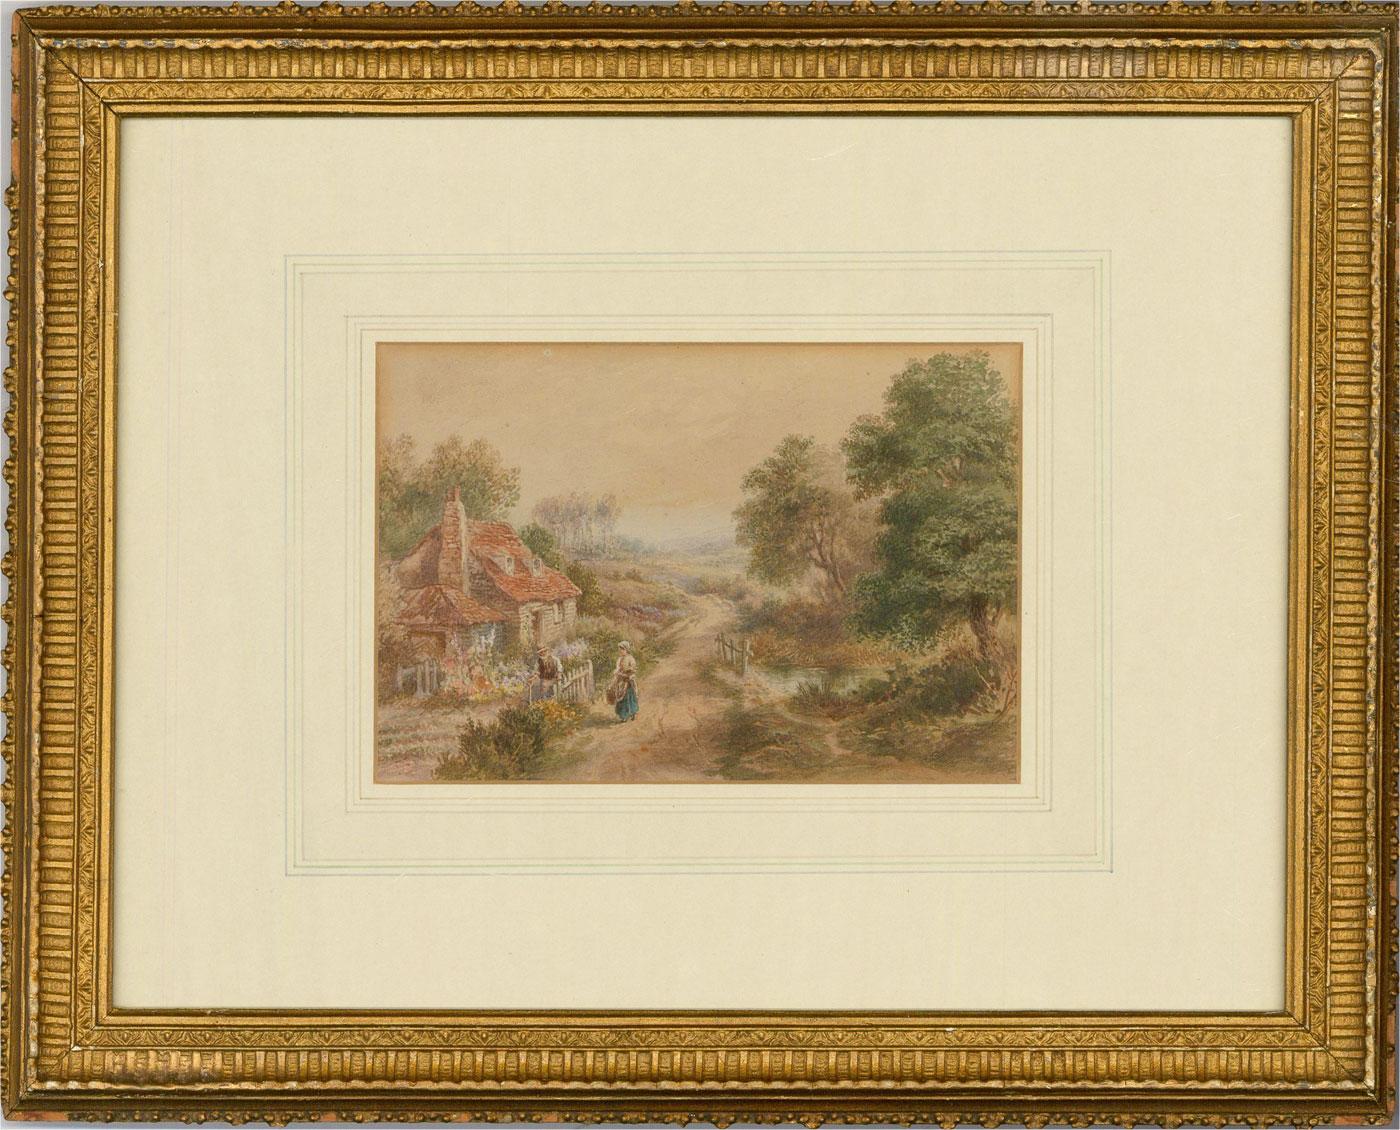 A fine rural landscape in watercolour showing a charming cottage dwelling with figures. The painting is signed with a monogram to the bottom left. Well presented in a moulded gilt frame with wash line mount. Glazed. On wove.